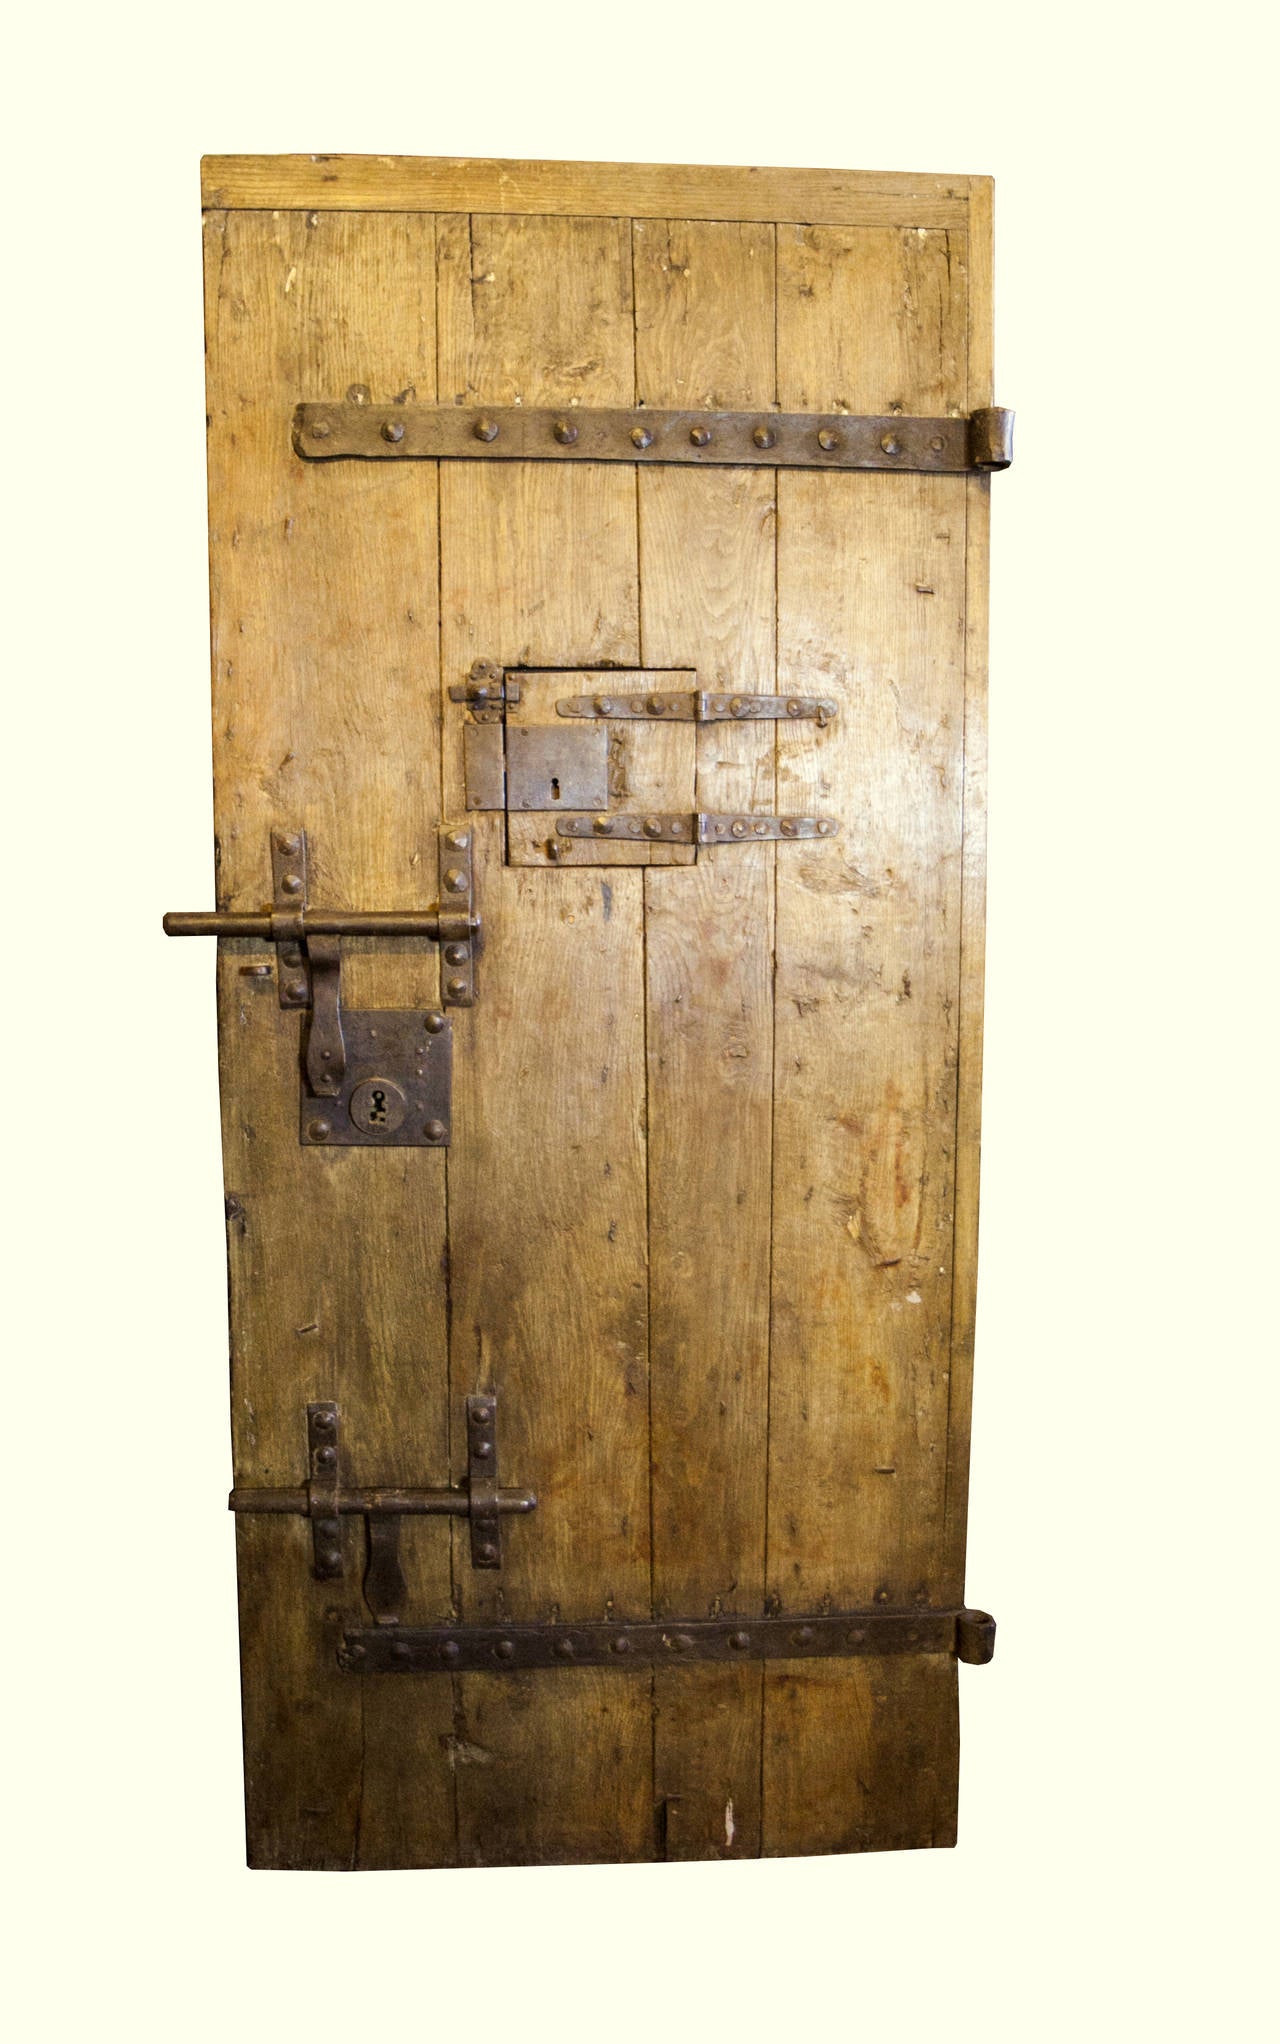 Antique Dungeon Door
Made of durmast
Comes from the Middle of Italy